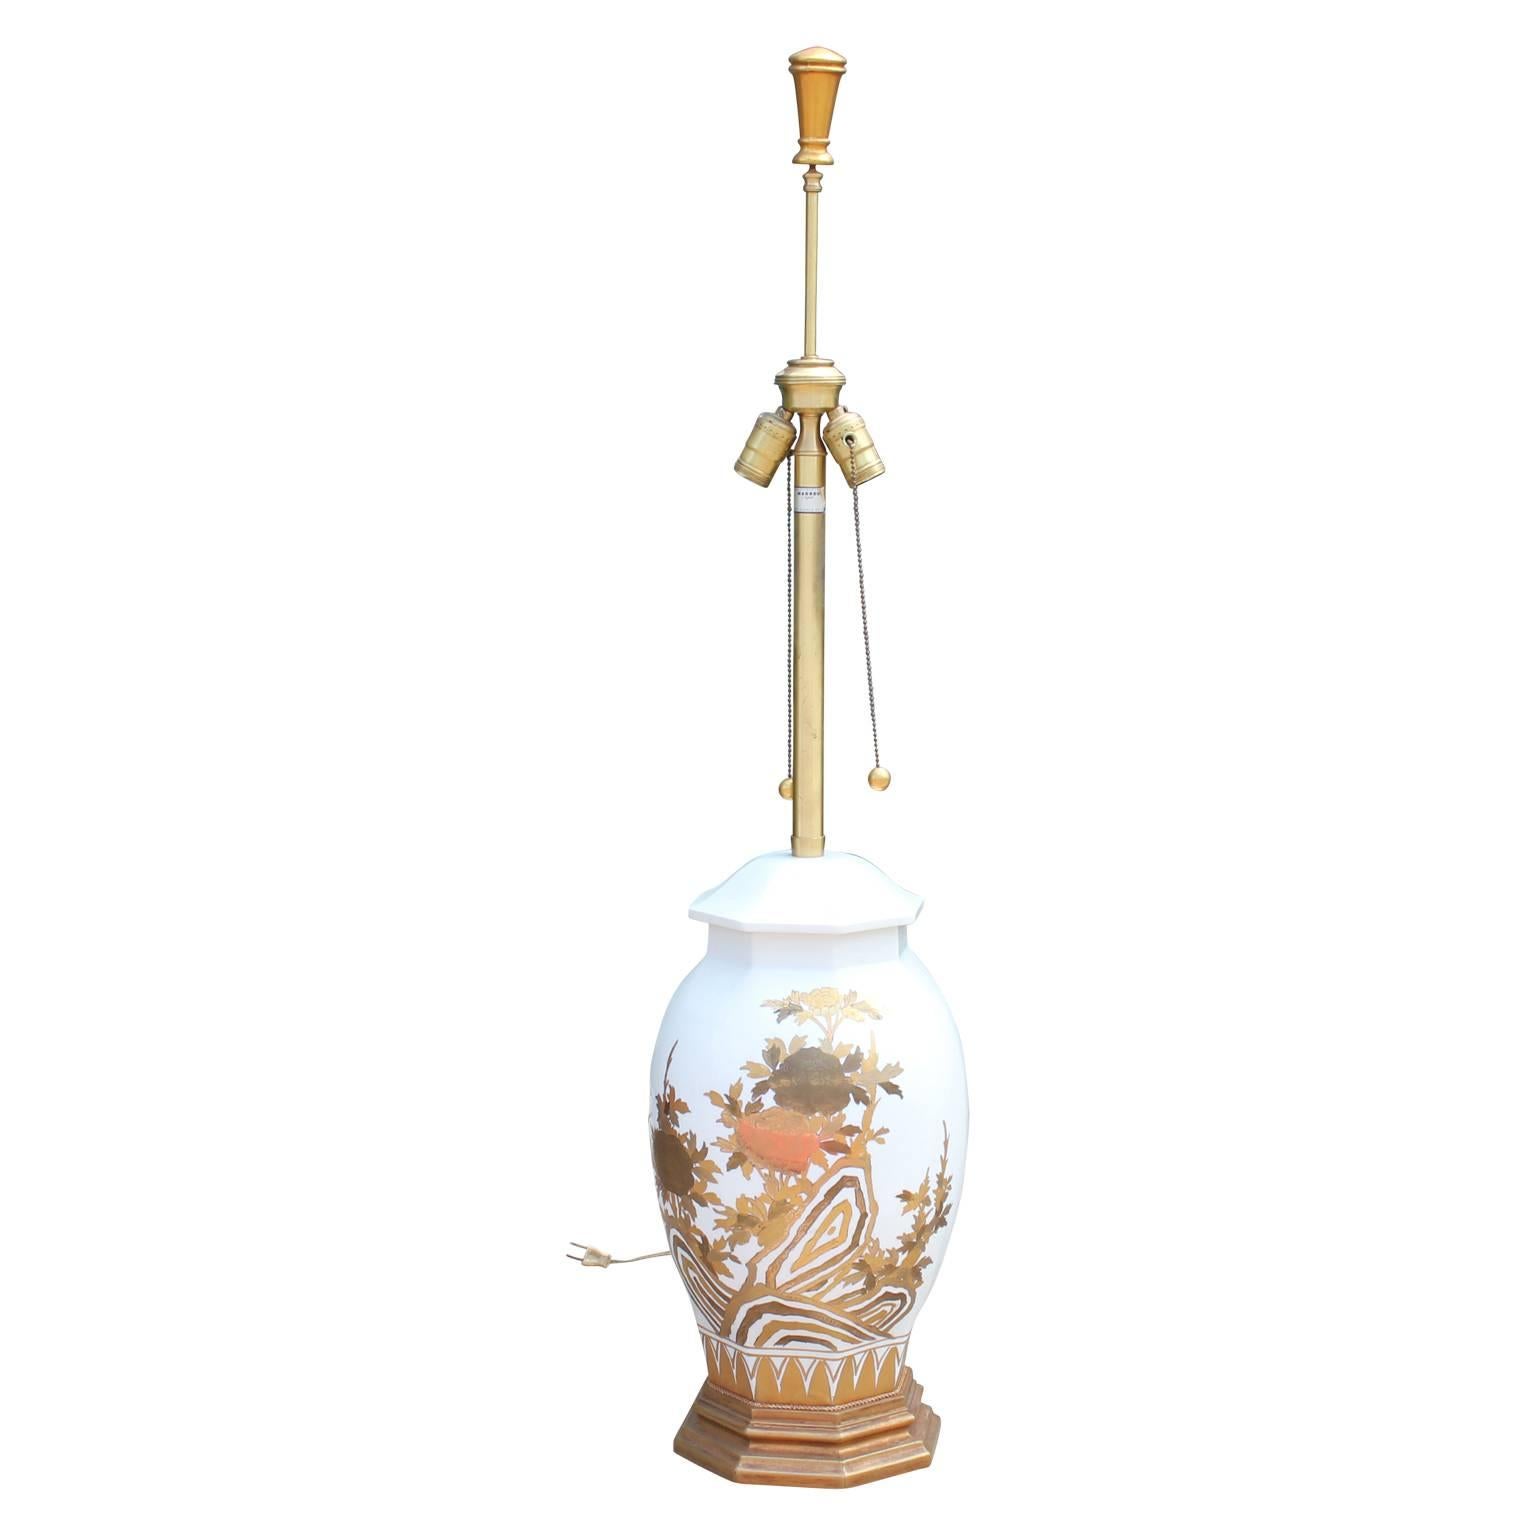 Hollywood Regency Pair of Large White Ceramic Table Lamps by Marbro with Gold Floral Detailing